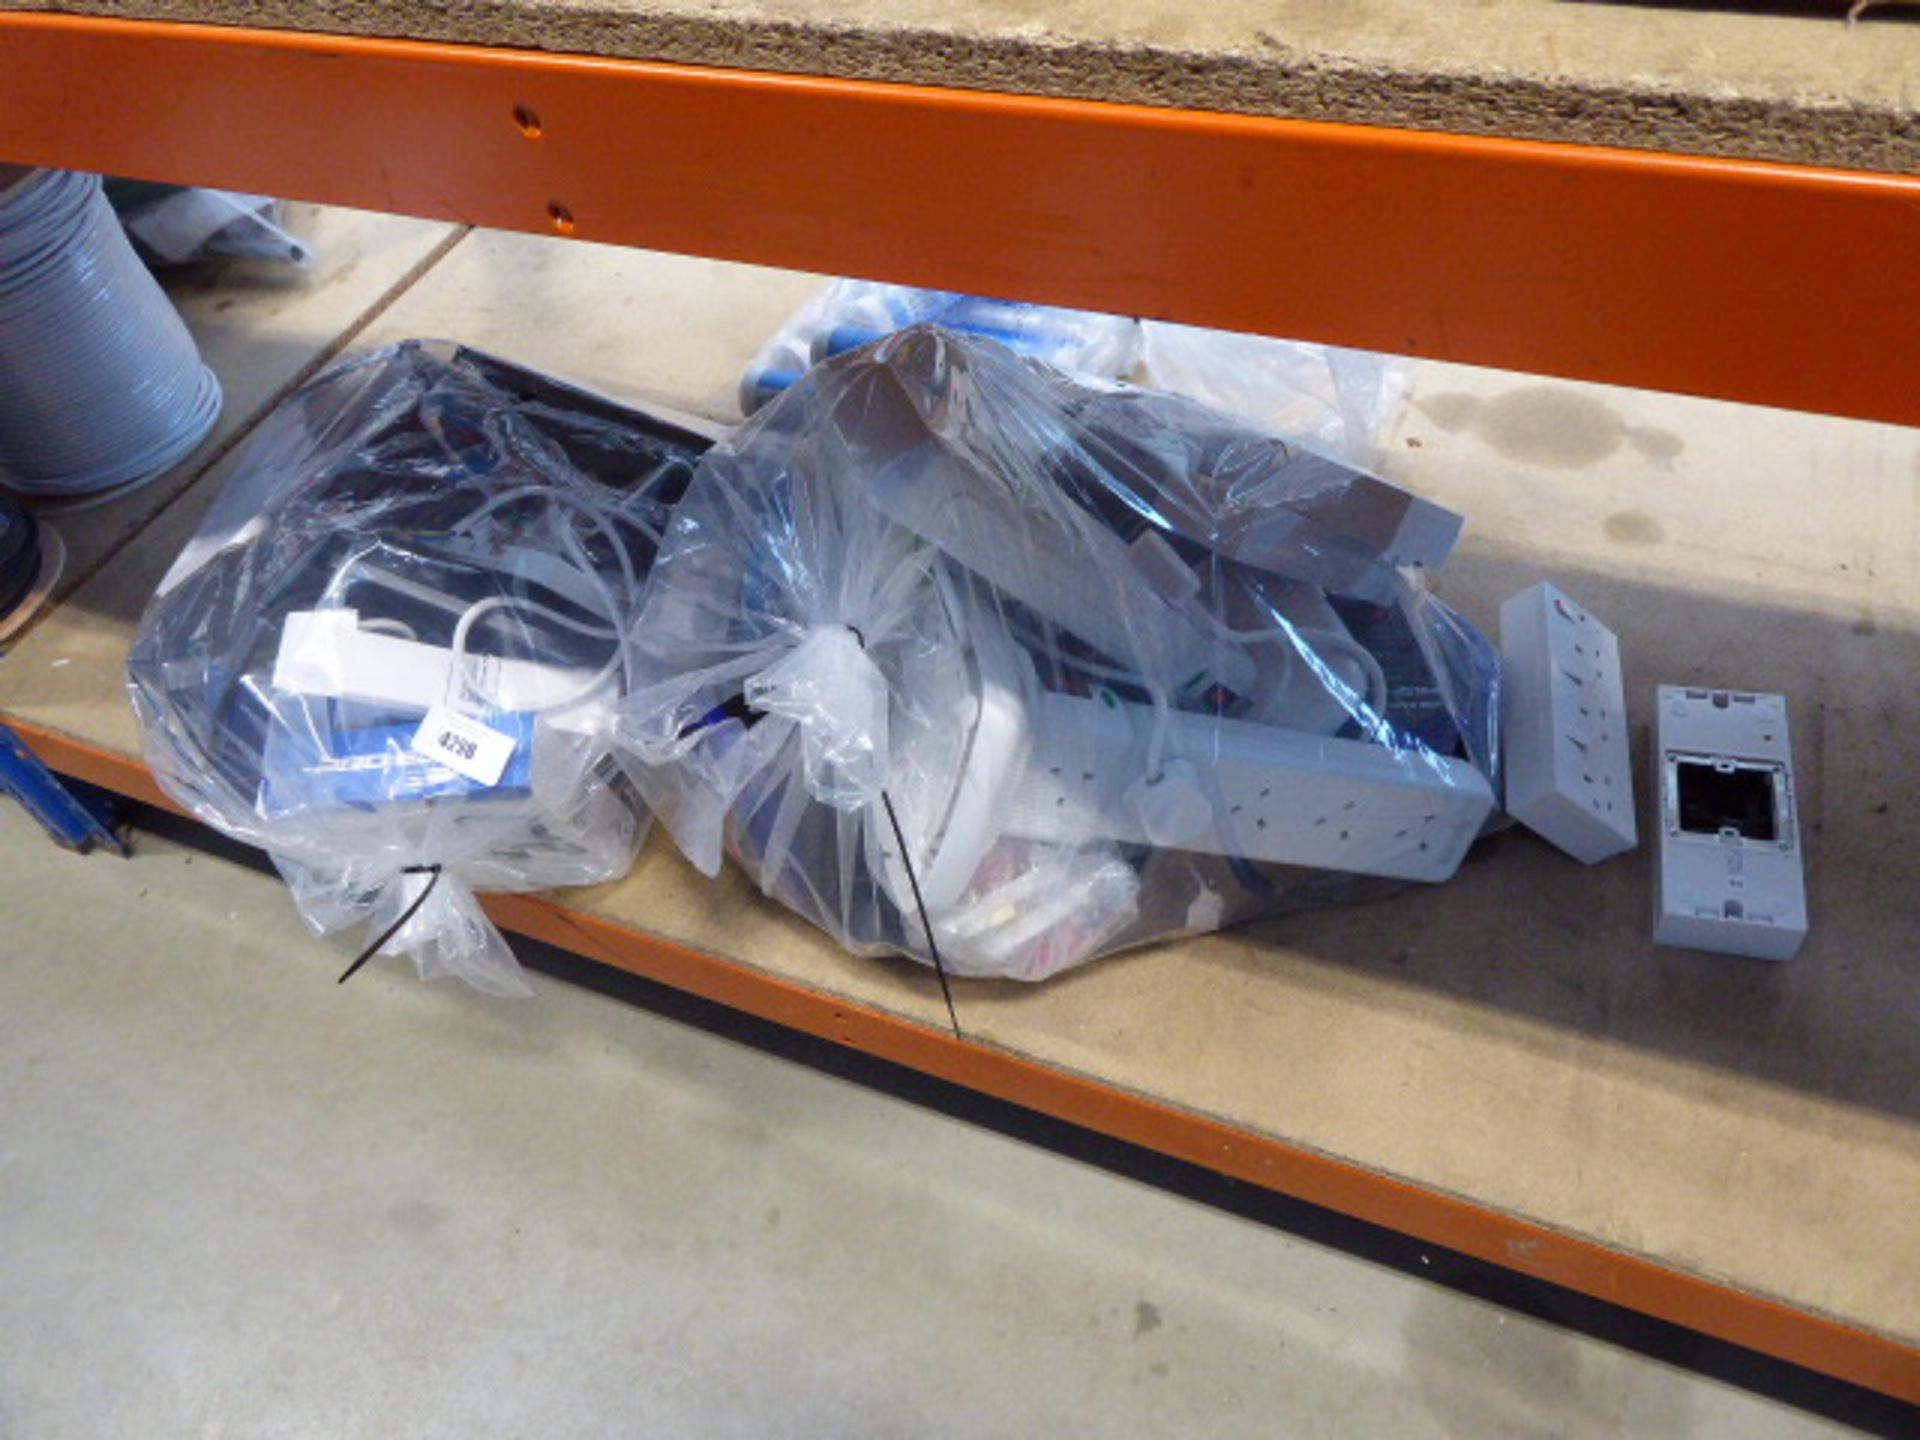 2 bags containing sockets, socket blocks, extension cables, lights, etc